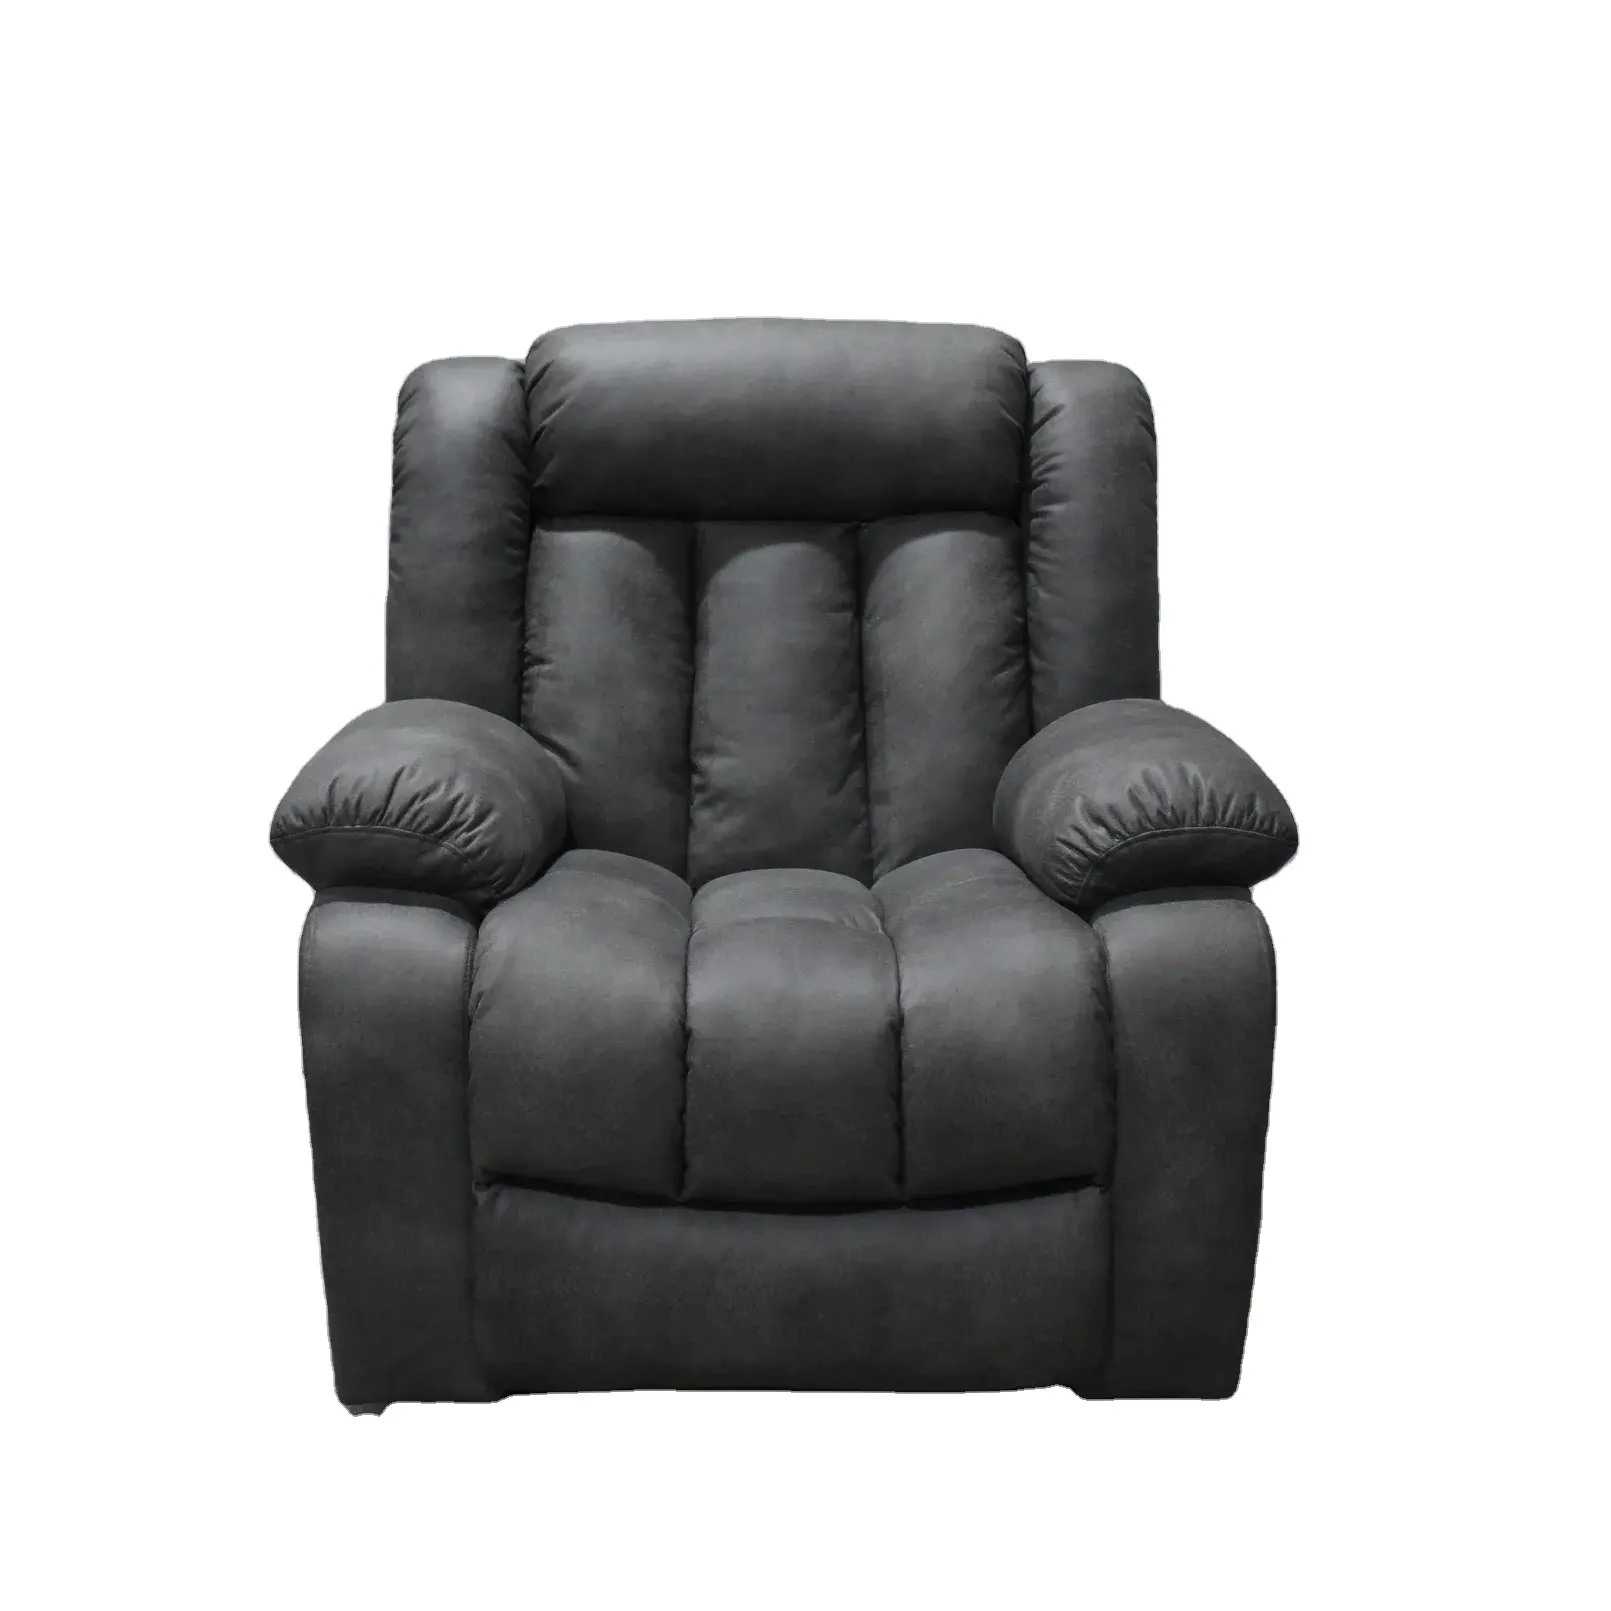 Cson design electric Recliner Sofa For Sale Lazy Reclining Lounge Sofa For lift recliner chair Living Room Furniture